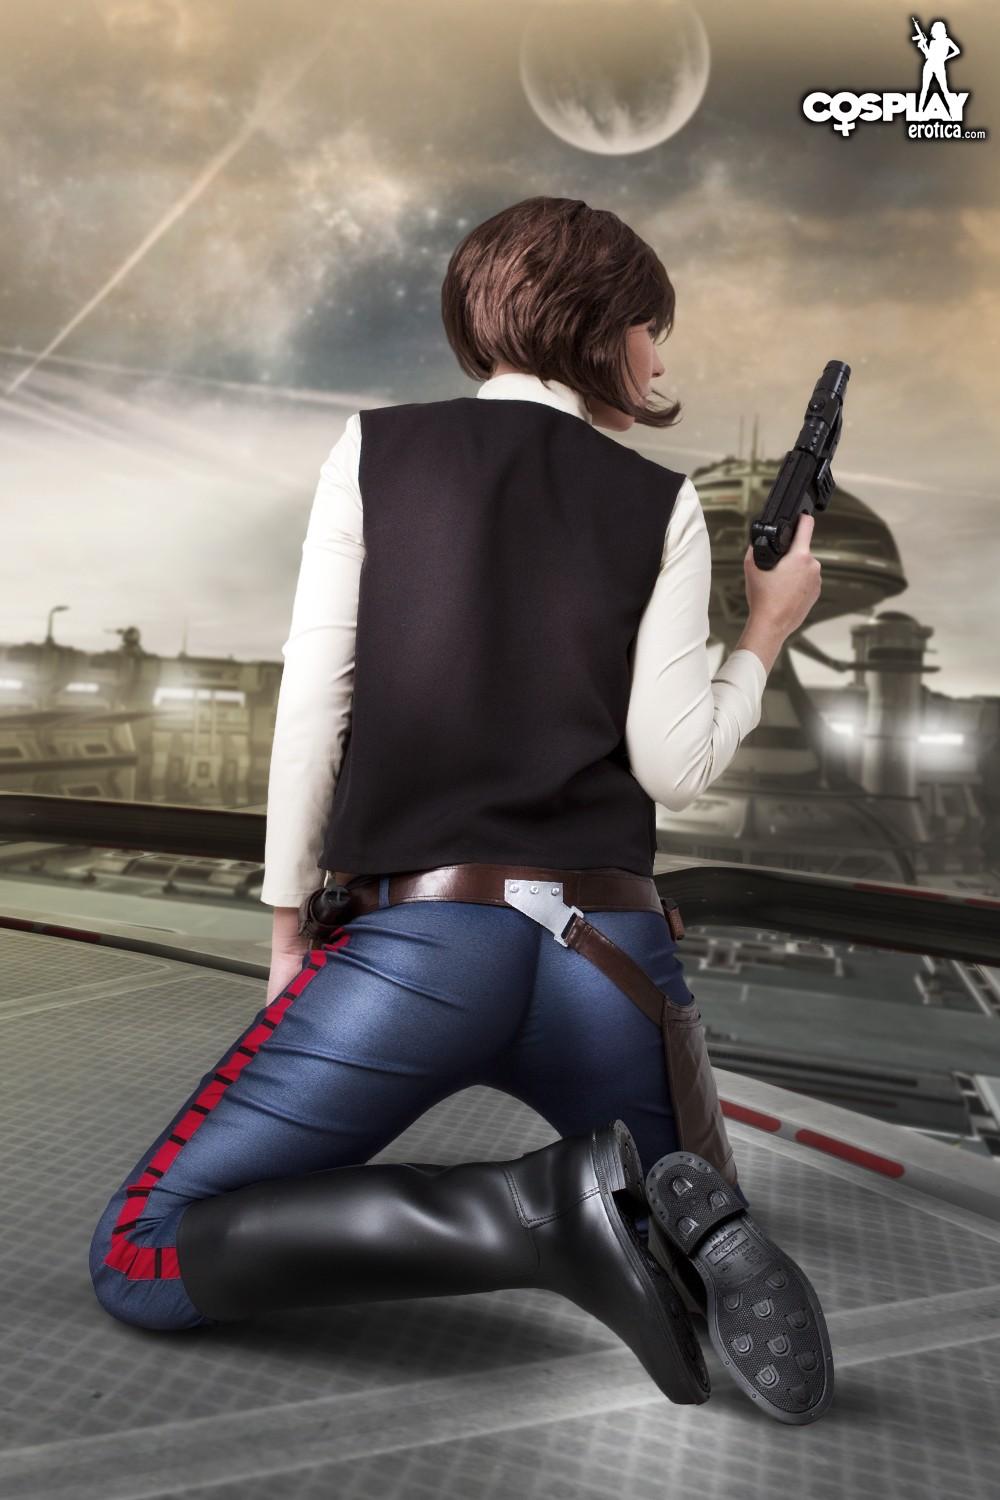 Cosplay girl Betsie dresses as the sexiest Han Solo I've ever seen #53438377